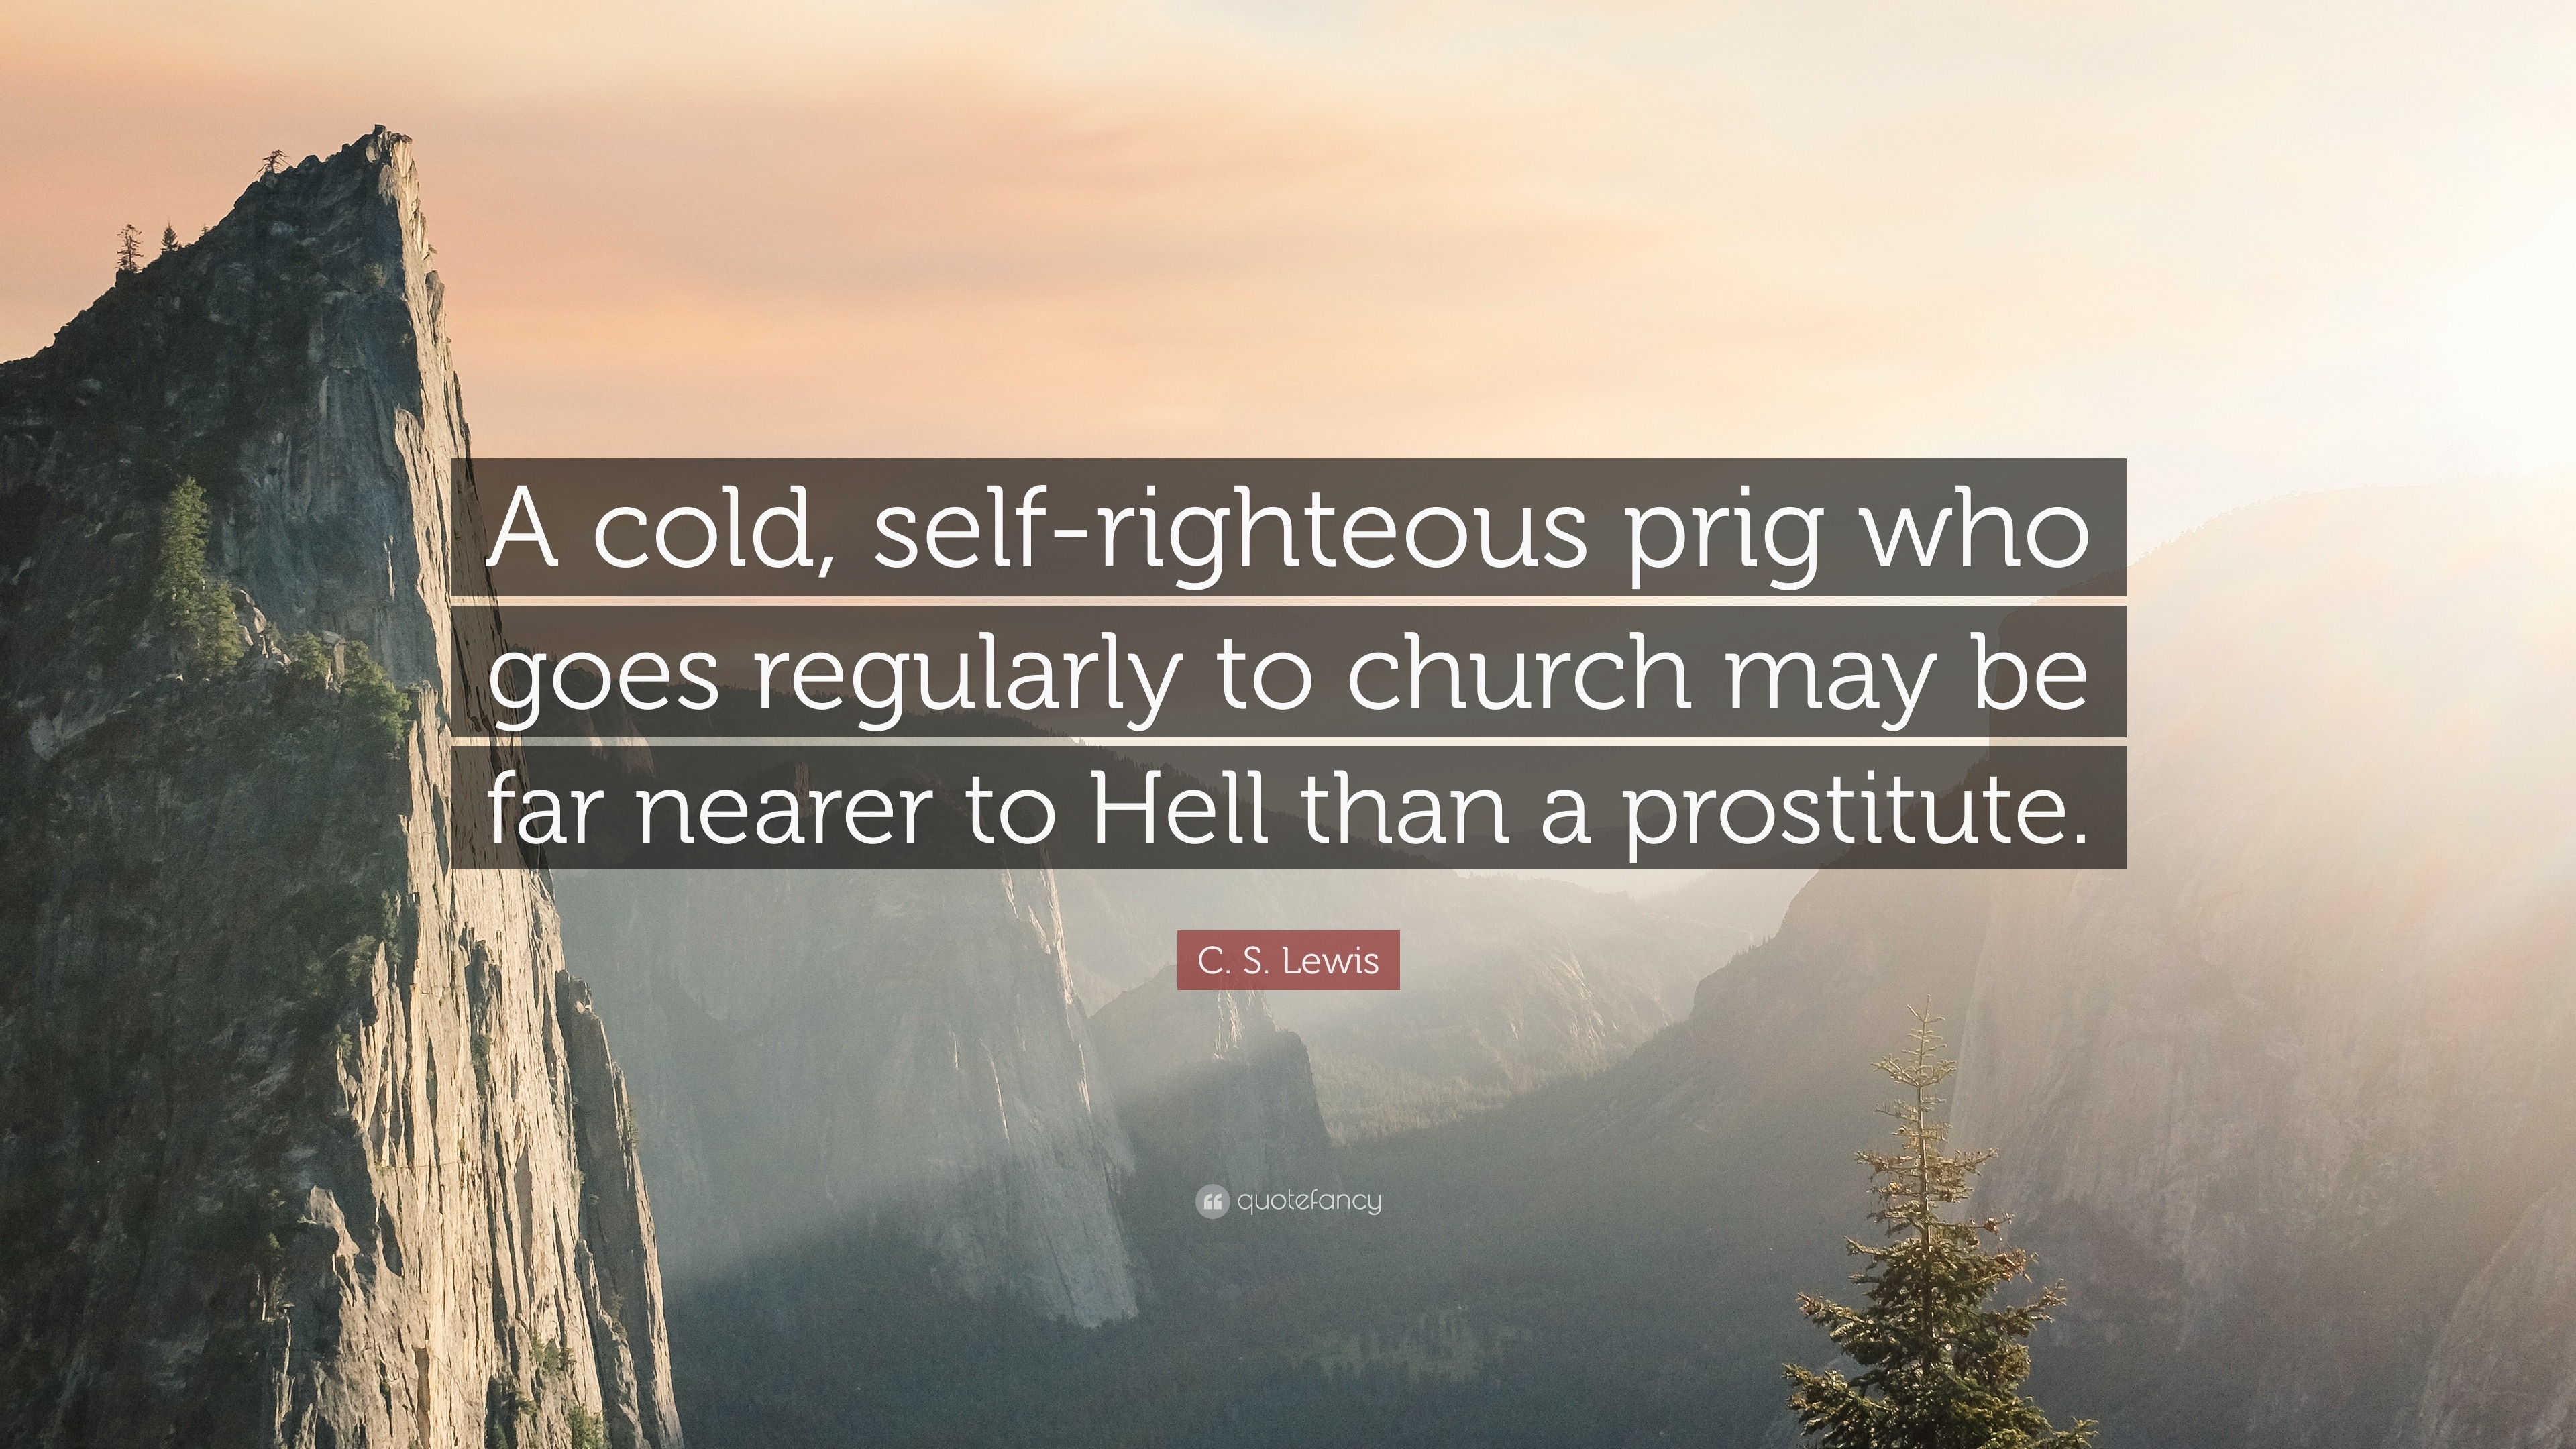 C. S. Lewis Quote: “A cold, self-righteous prig who goes regularly to